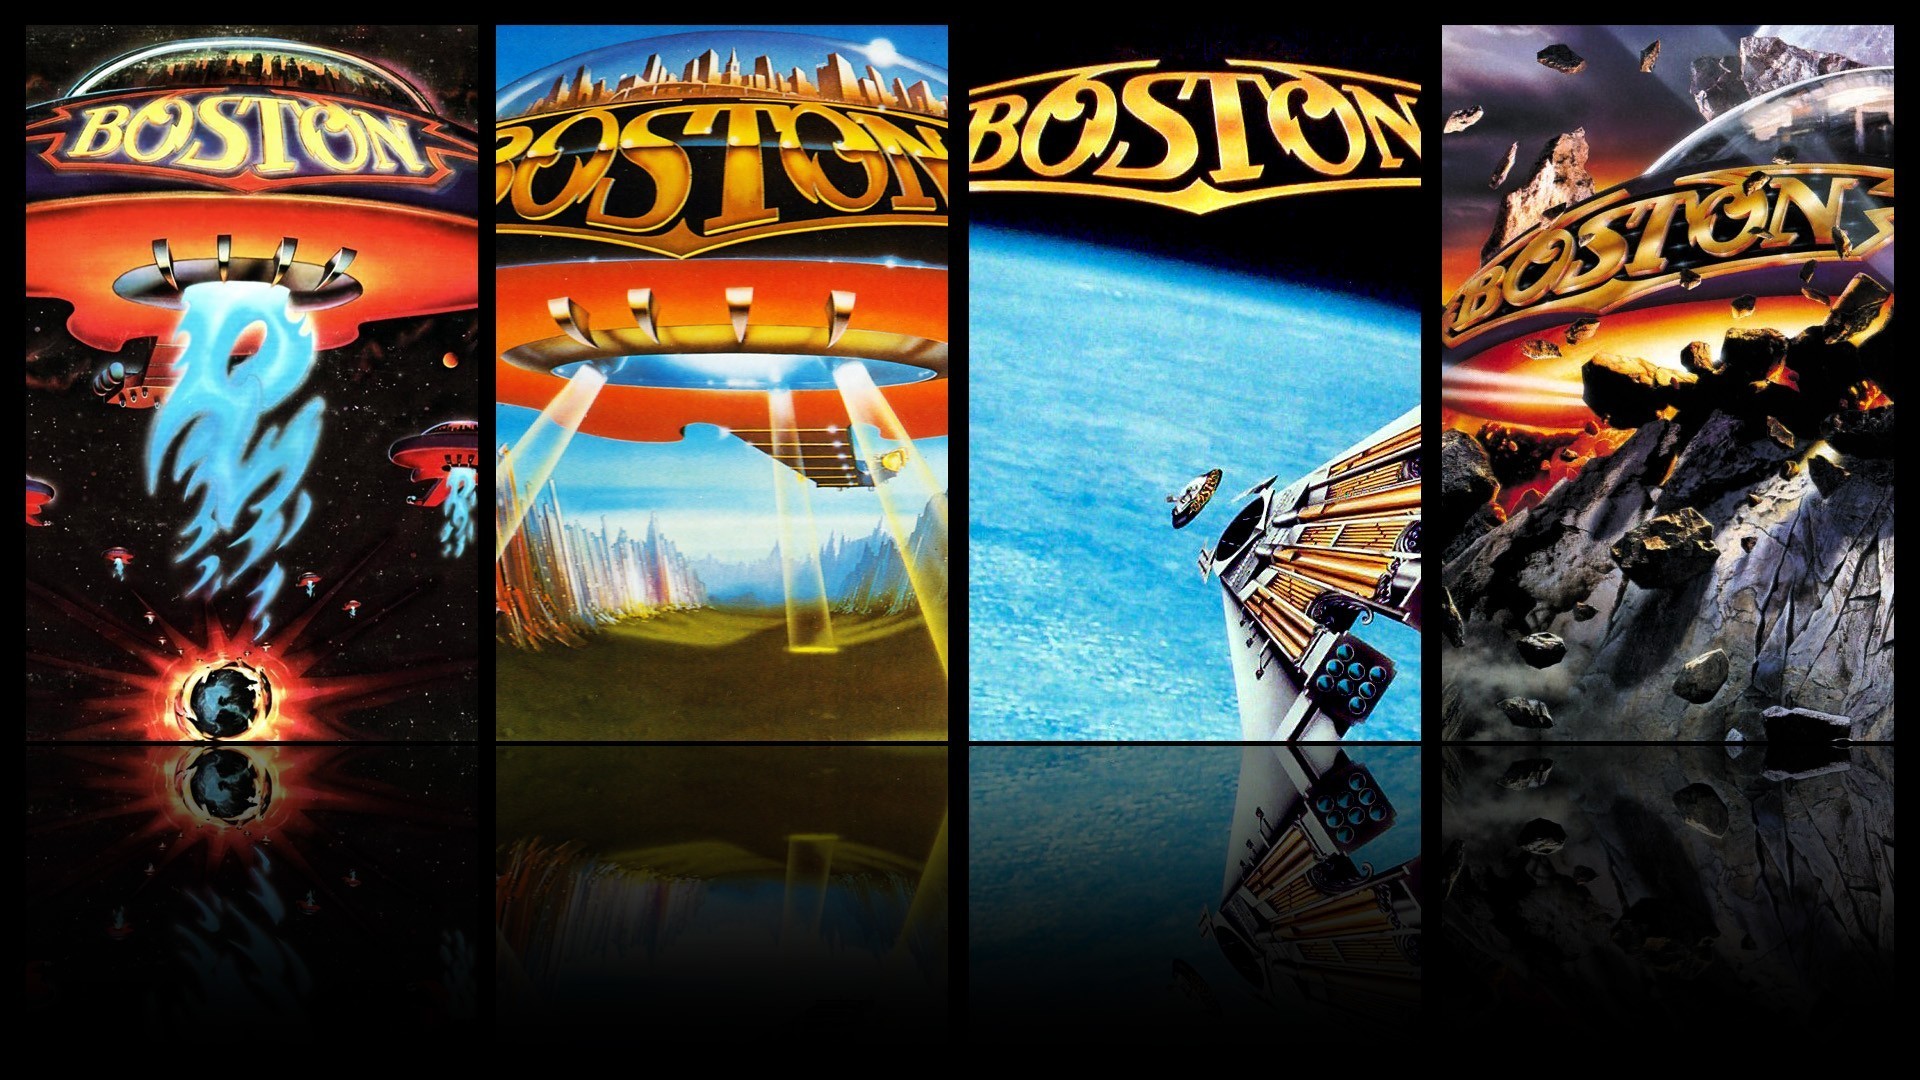 General 1920x1080 music rock bands collage band Boston